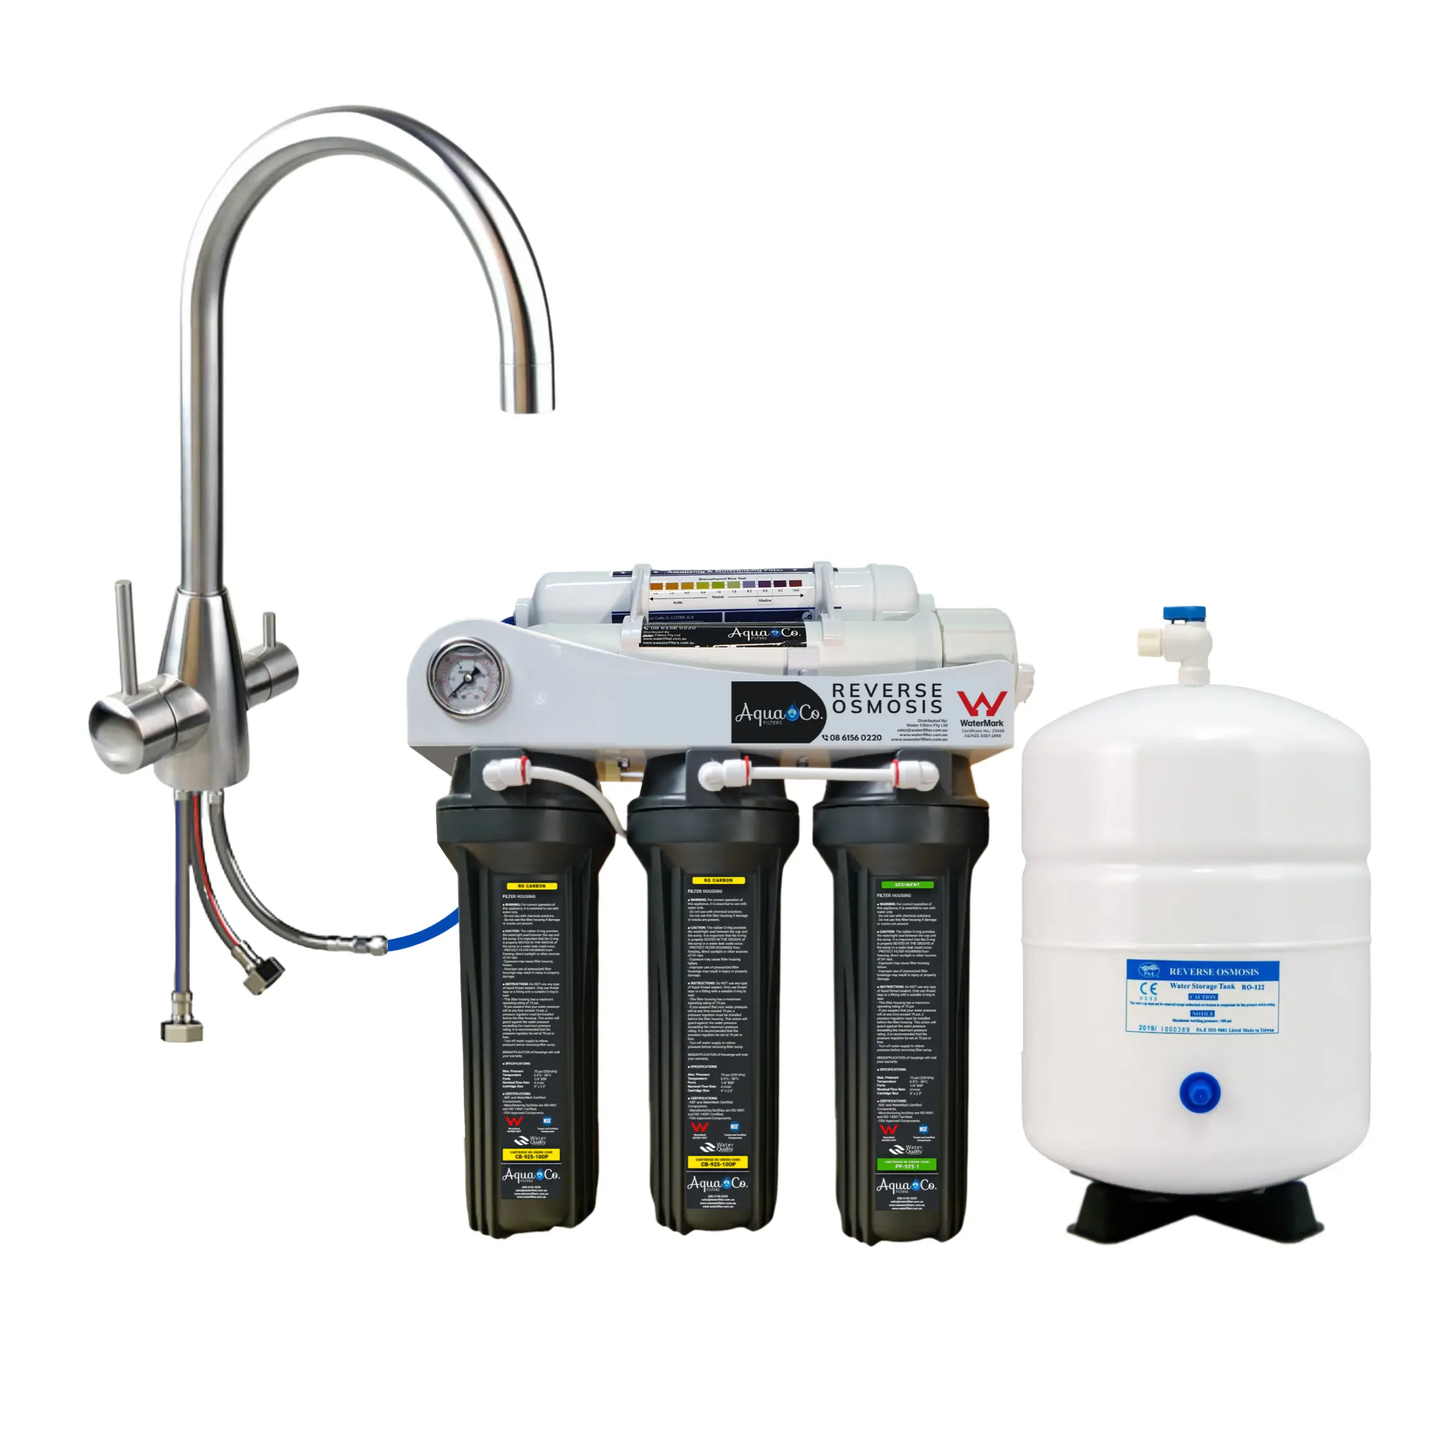 Bundle Deal: AquaCo 5 Stage Reverse Osmosis with 3 Way Mixer – Avoid Drilling a Hole and Replace Your Kitchen Mixer with a 3 Way Tap